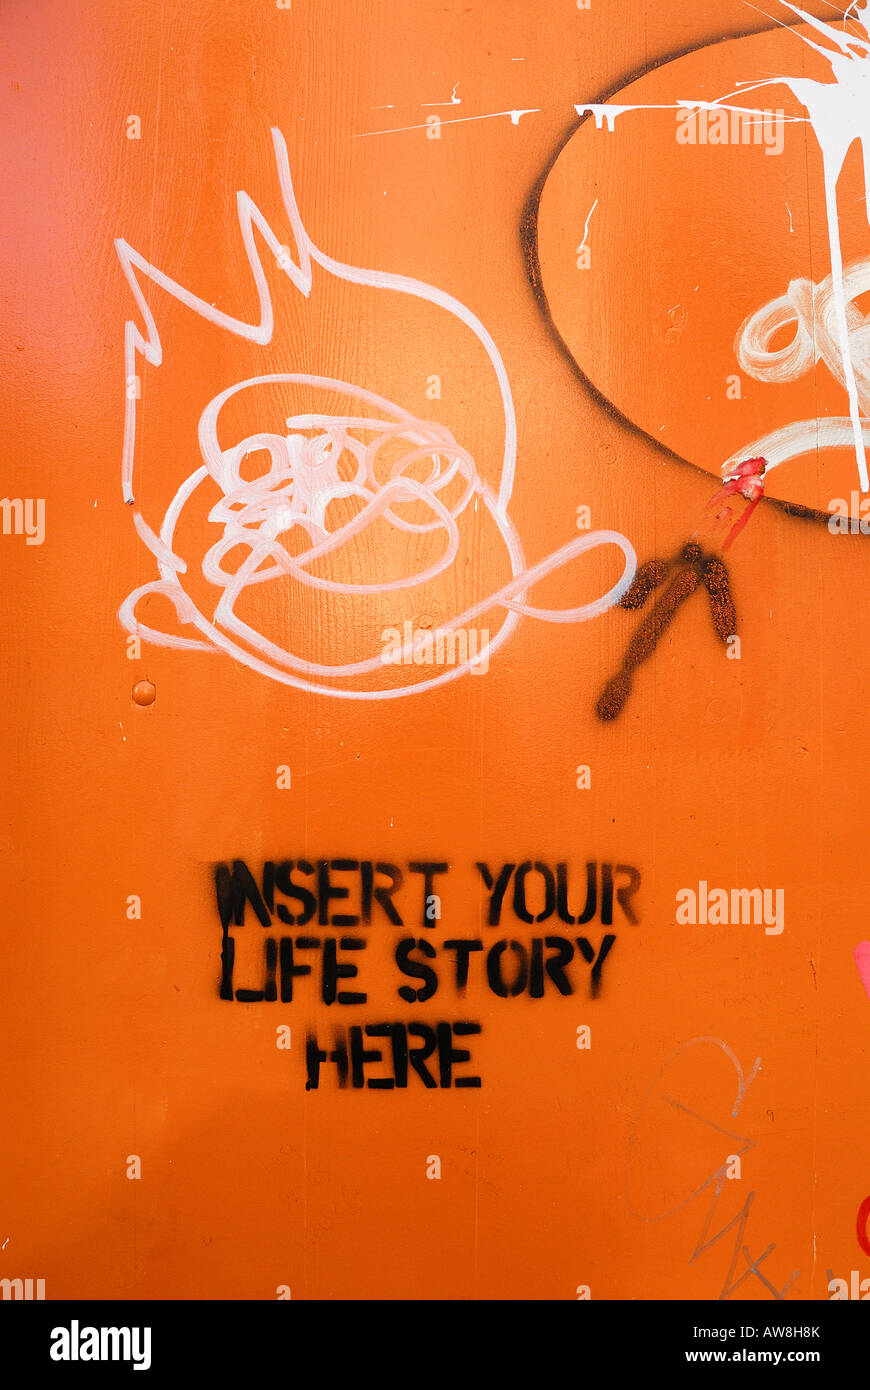 Insert your life story here Stock Photo